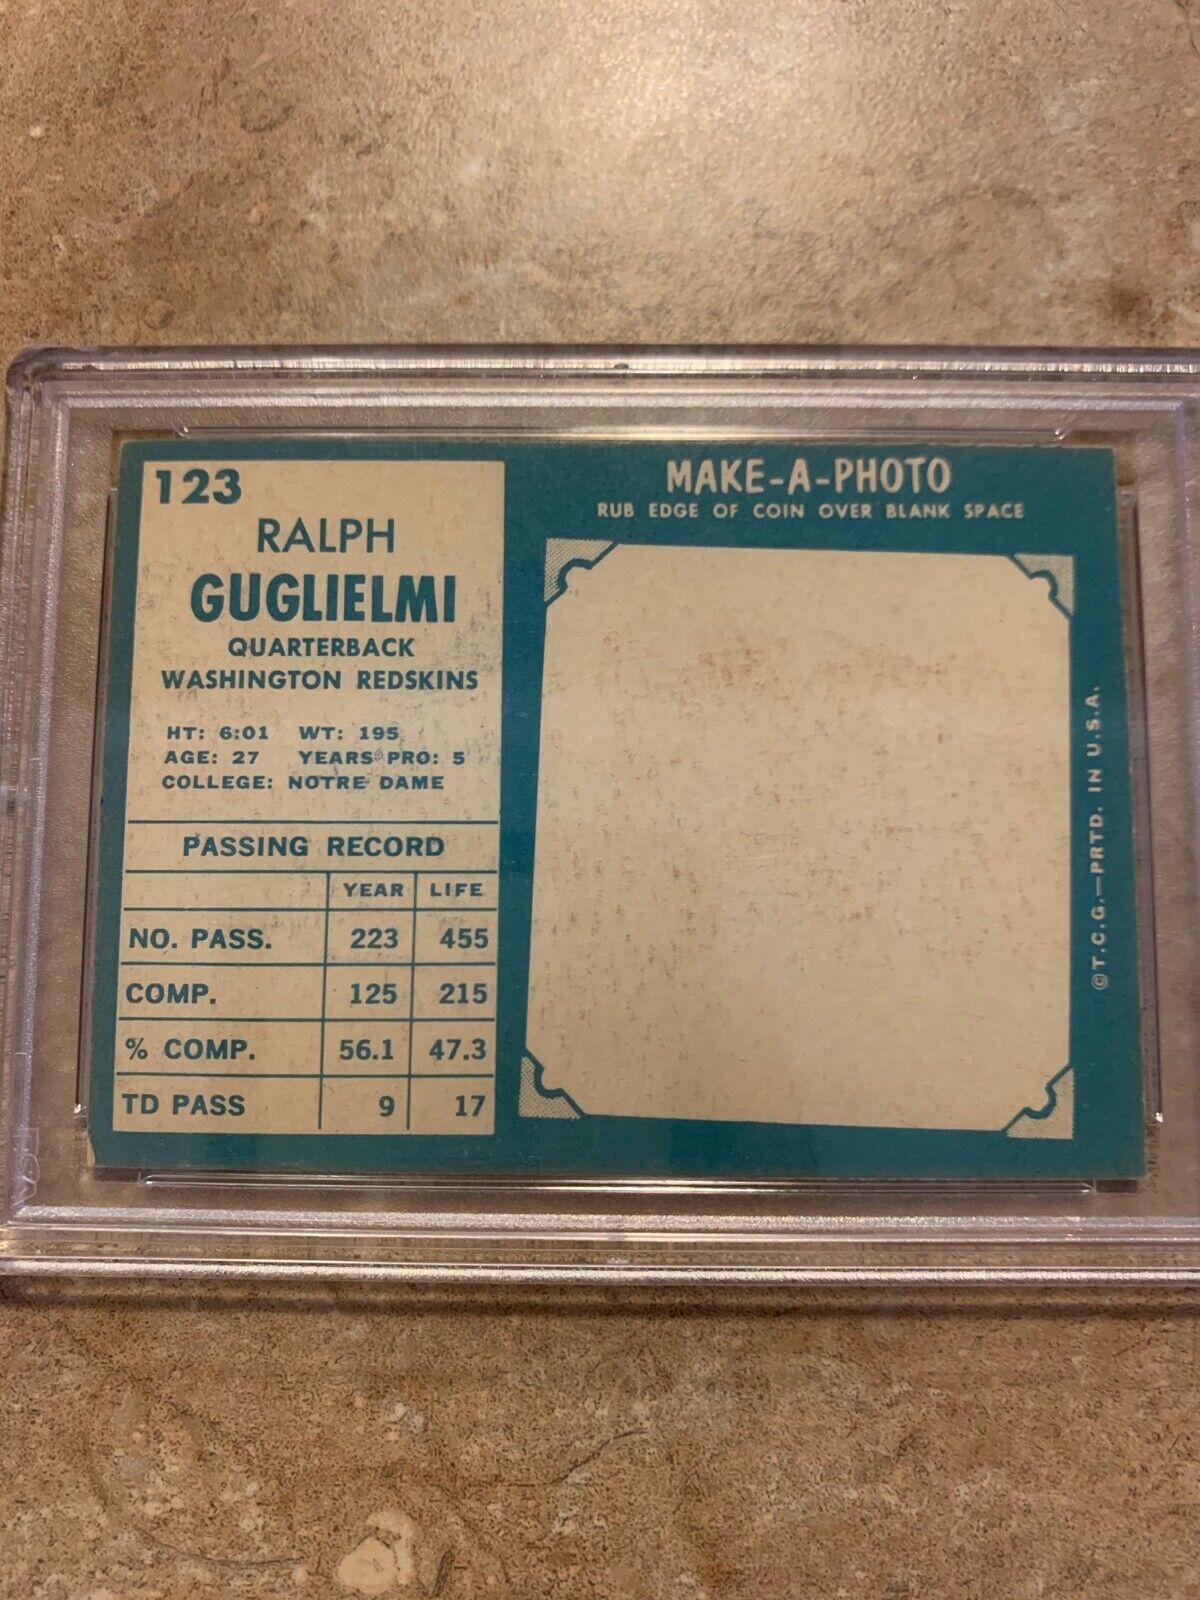 Ralph Gugliemi Autographed 1961 Topps Card 123 PSA Certified & Slabbed Auto 2